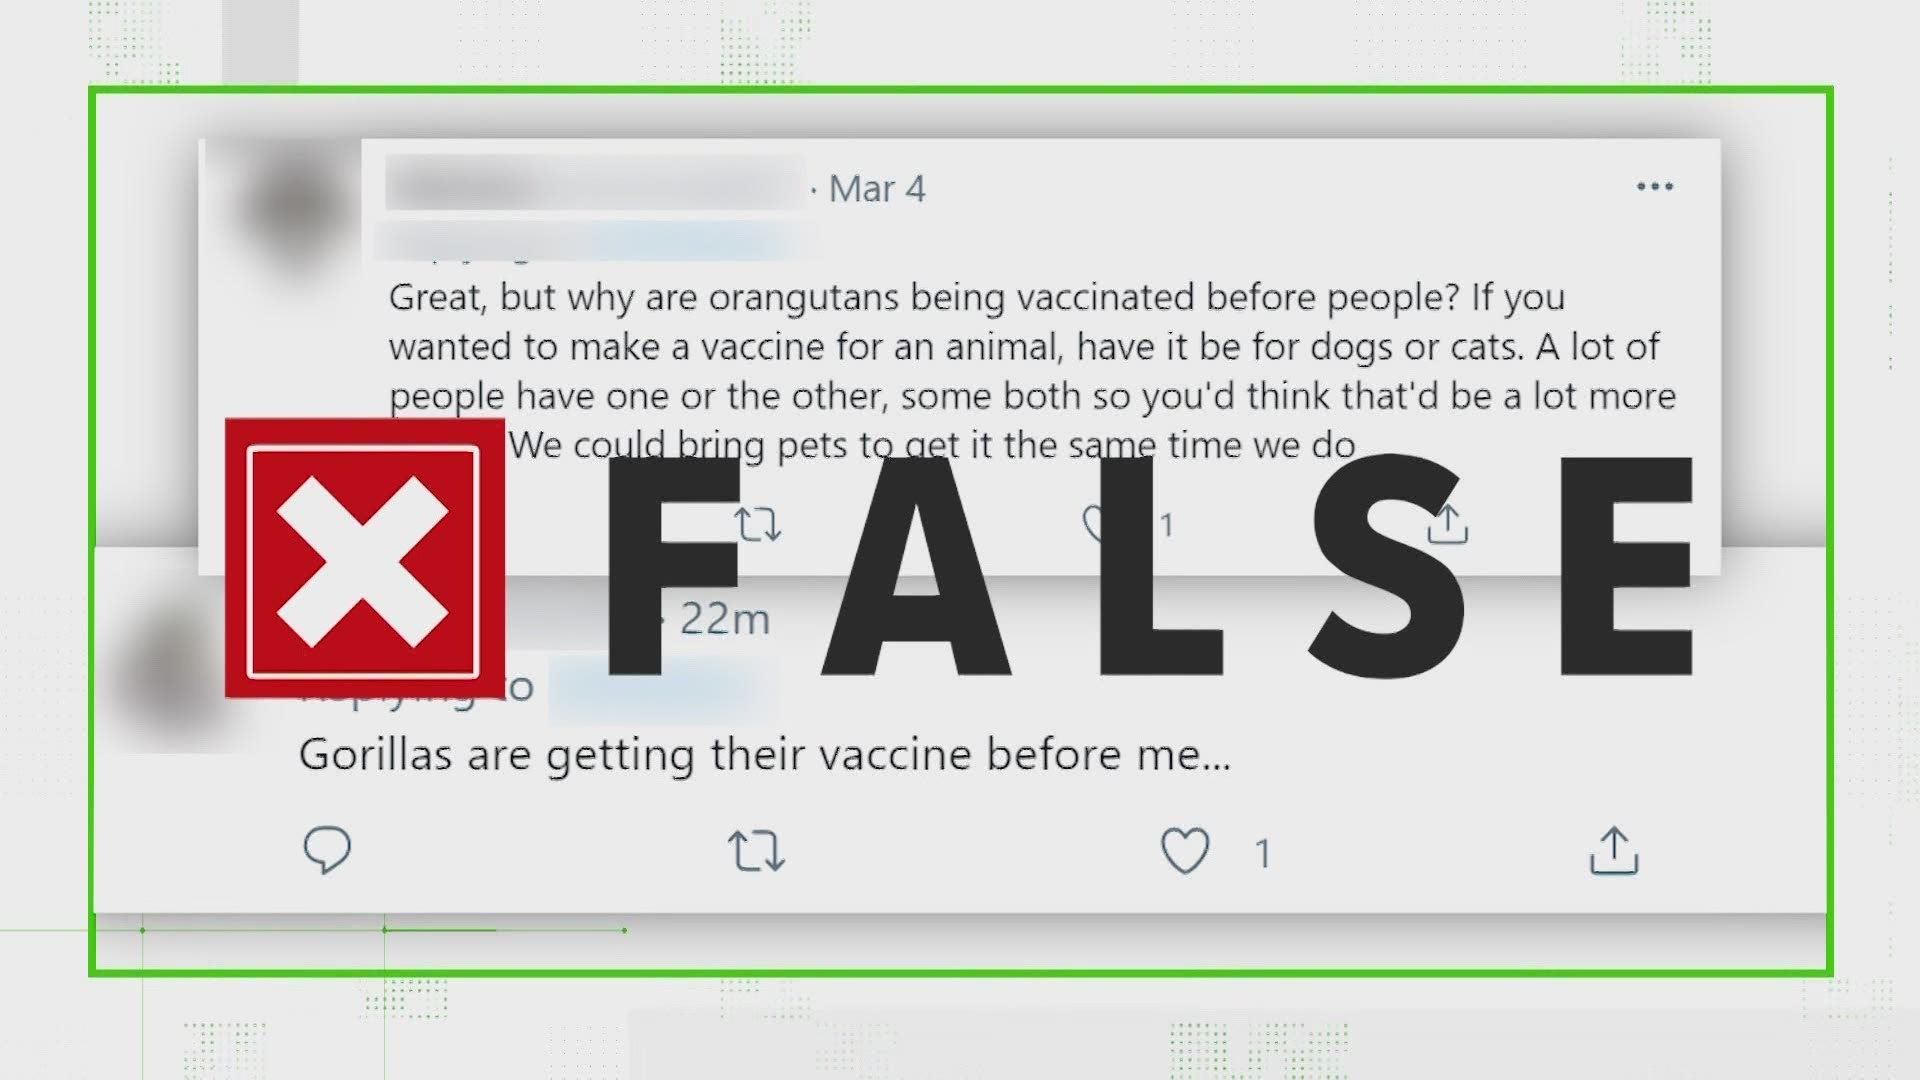 Vaccines for animals are developed differently and by different companies than human vaccines. So no animal is getting a vaccine that could have gone to people.